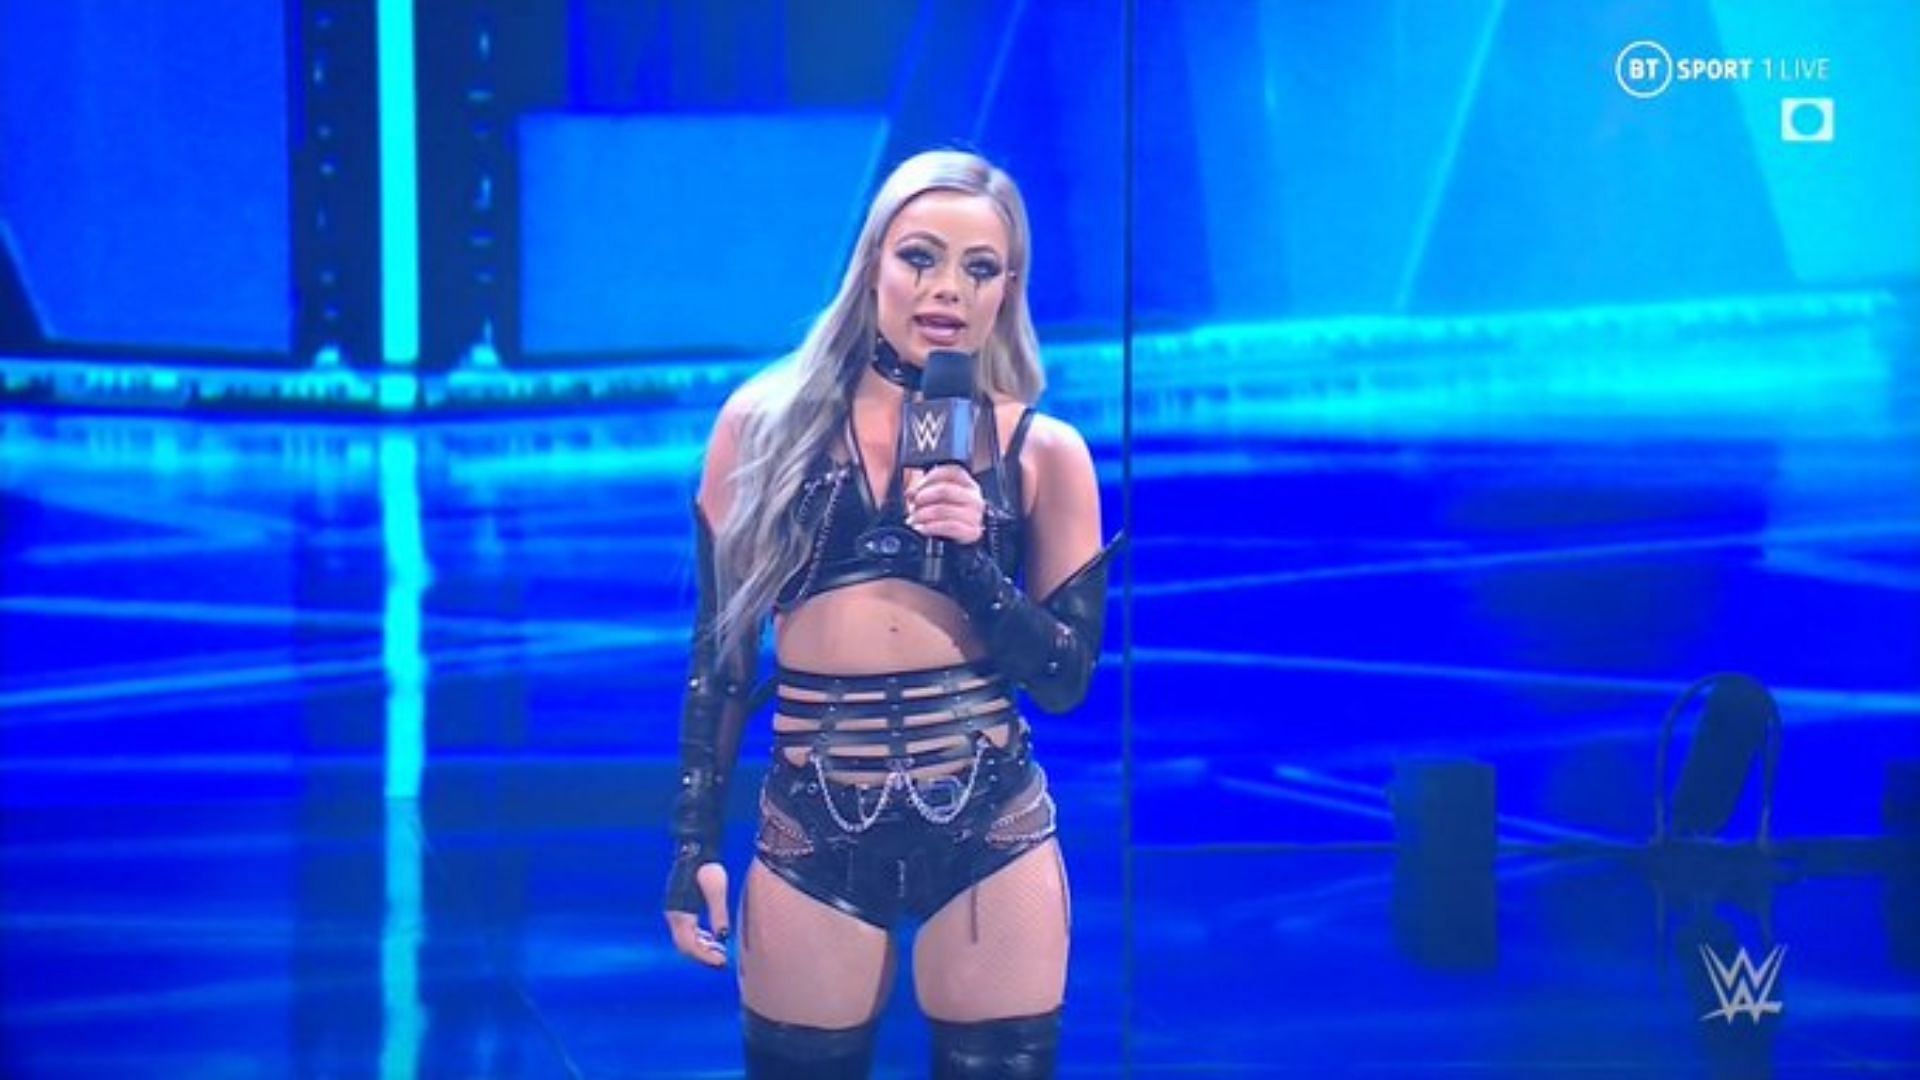 Liv Morgan took the fight to Damage CTRL on SmackDown